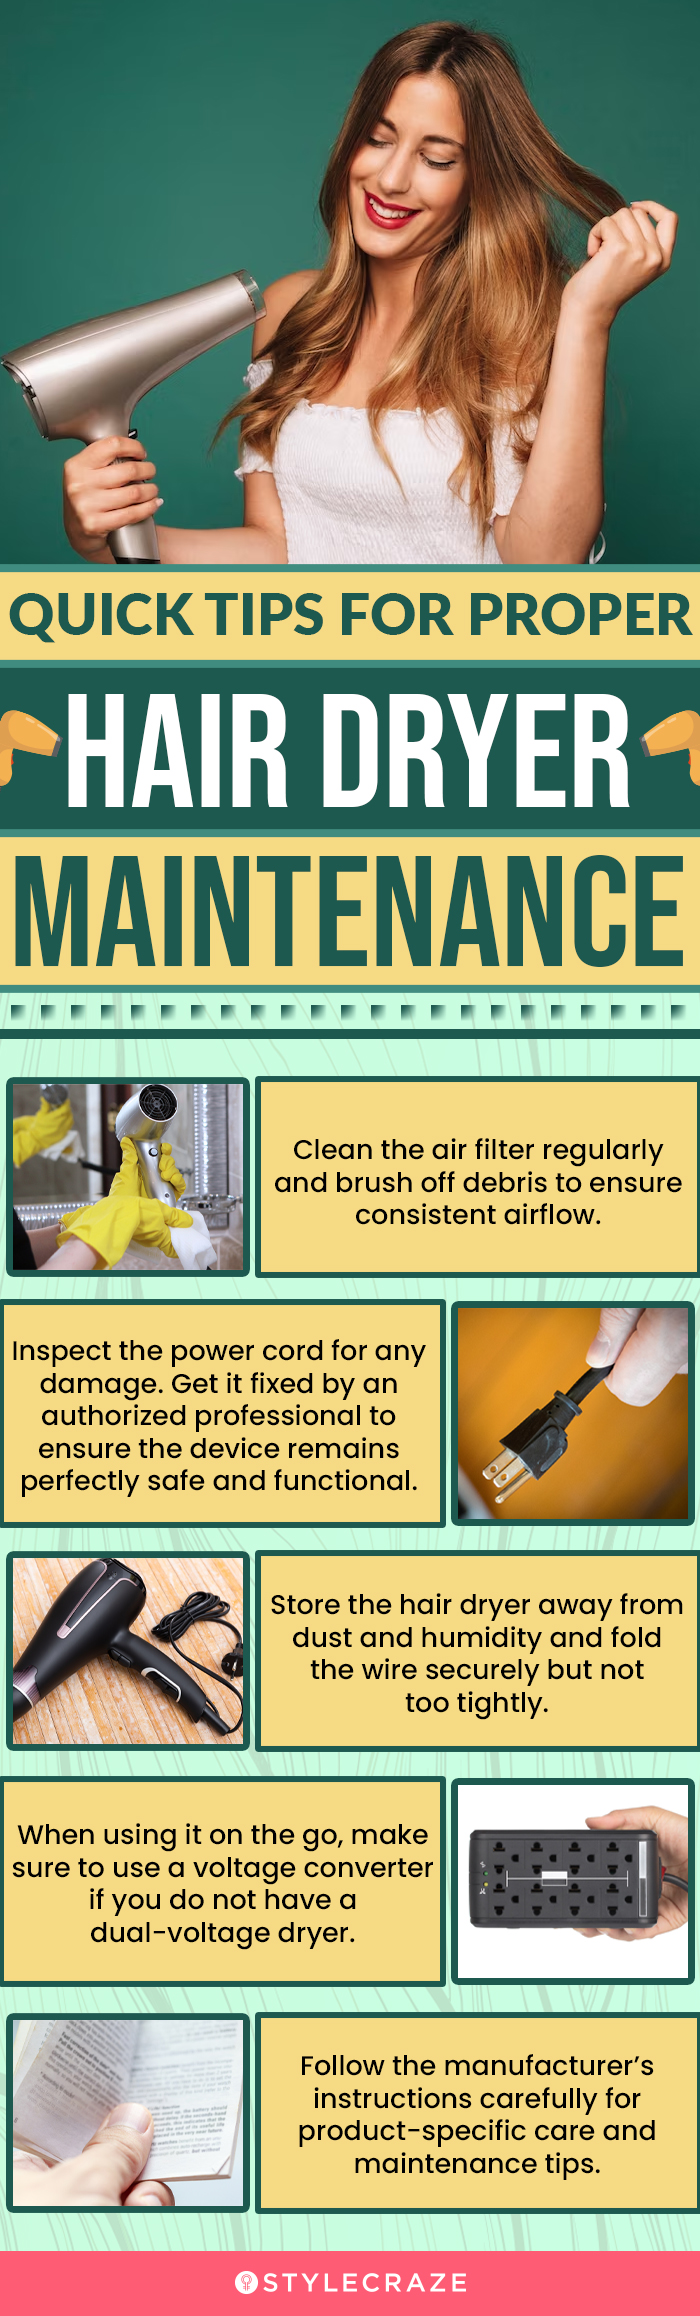 Quick Tips For Proper Hair Dryer Maintenance (infographic)